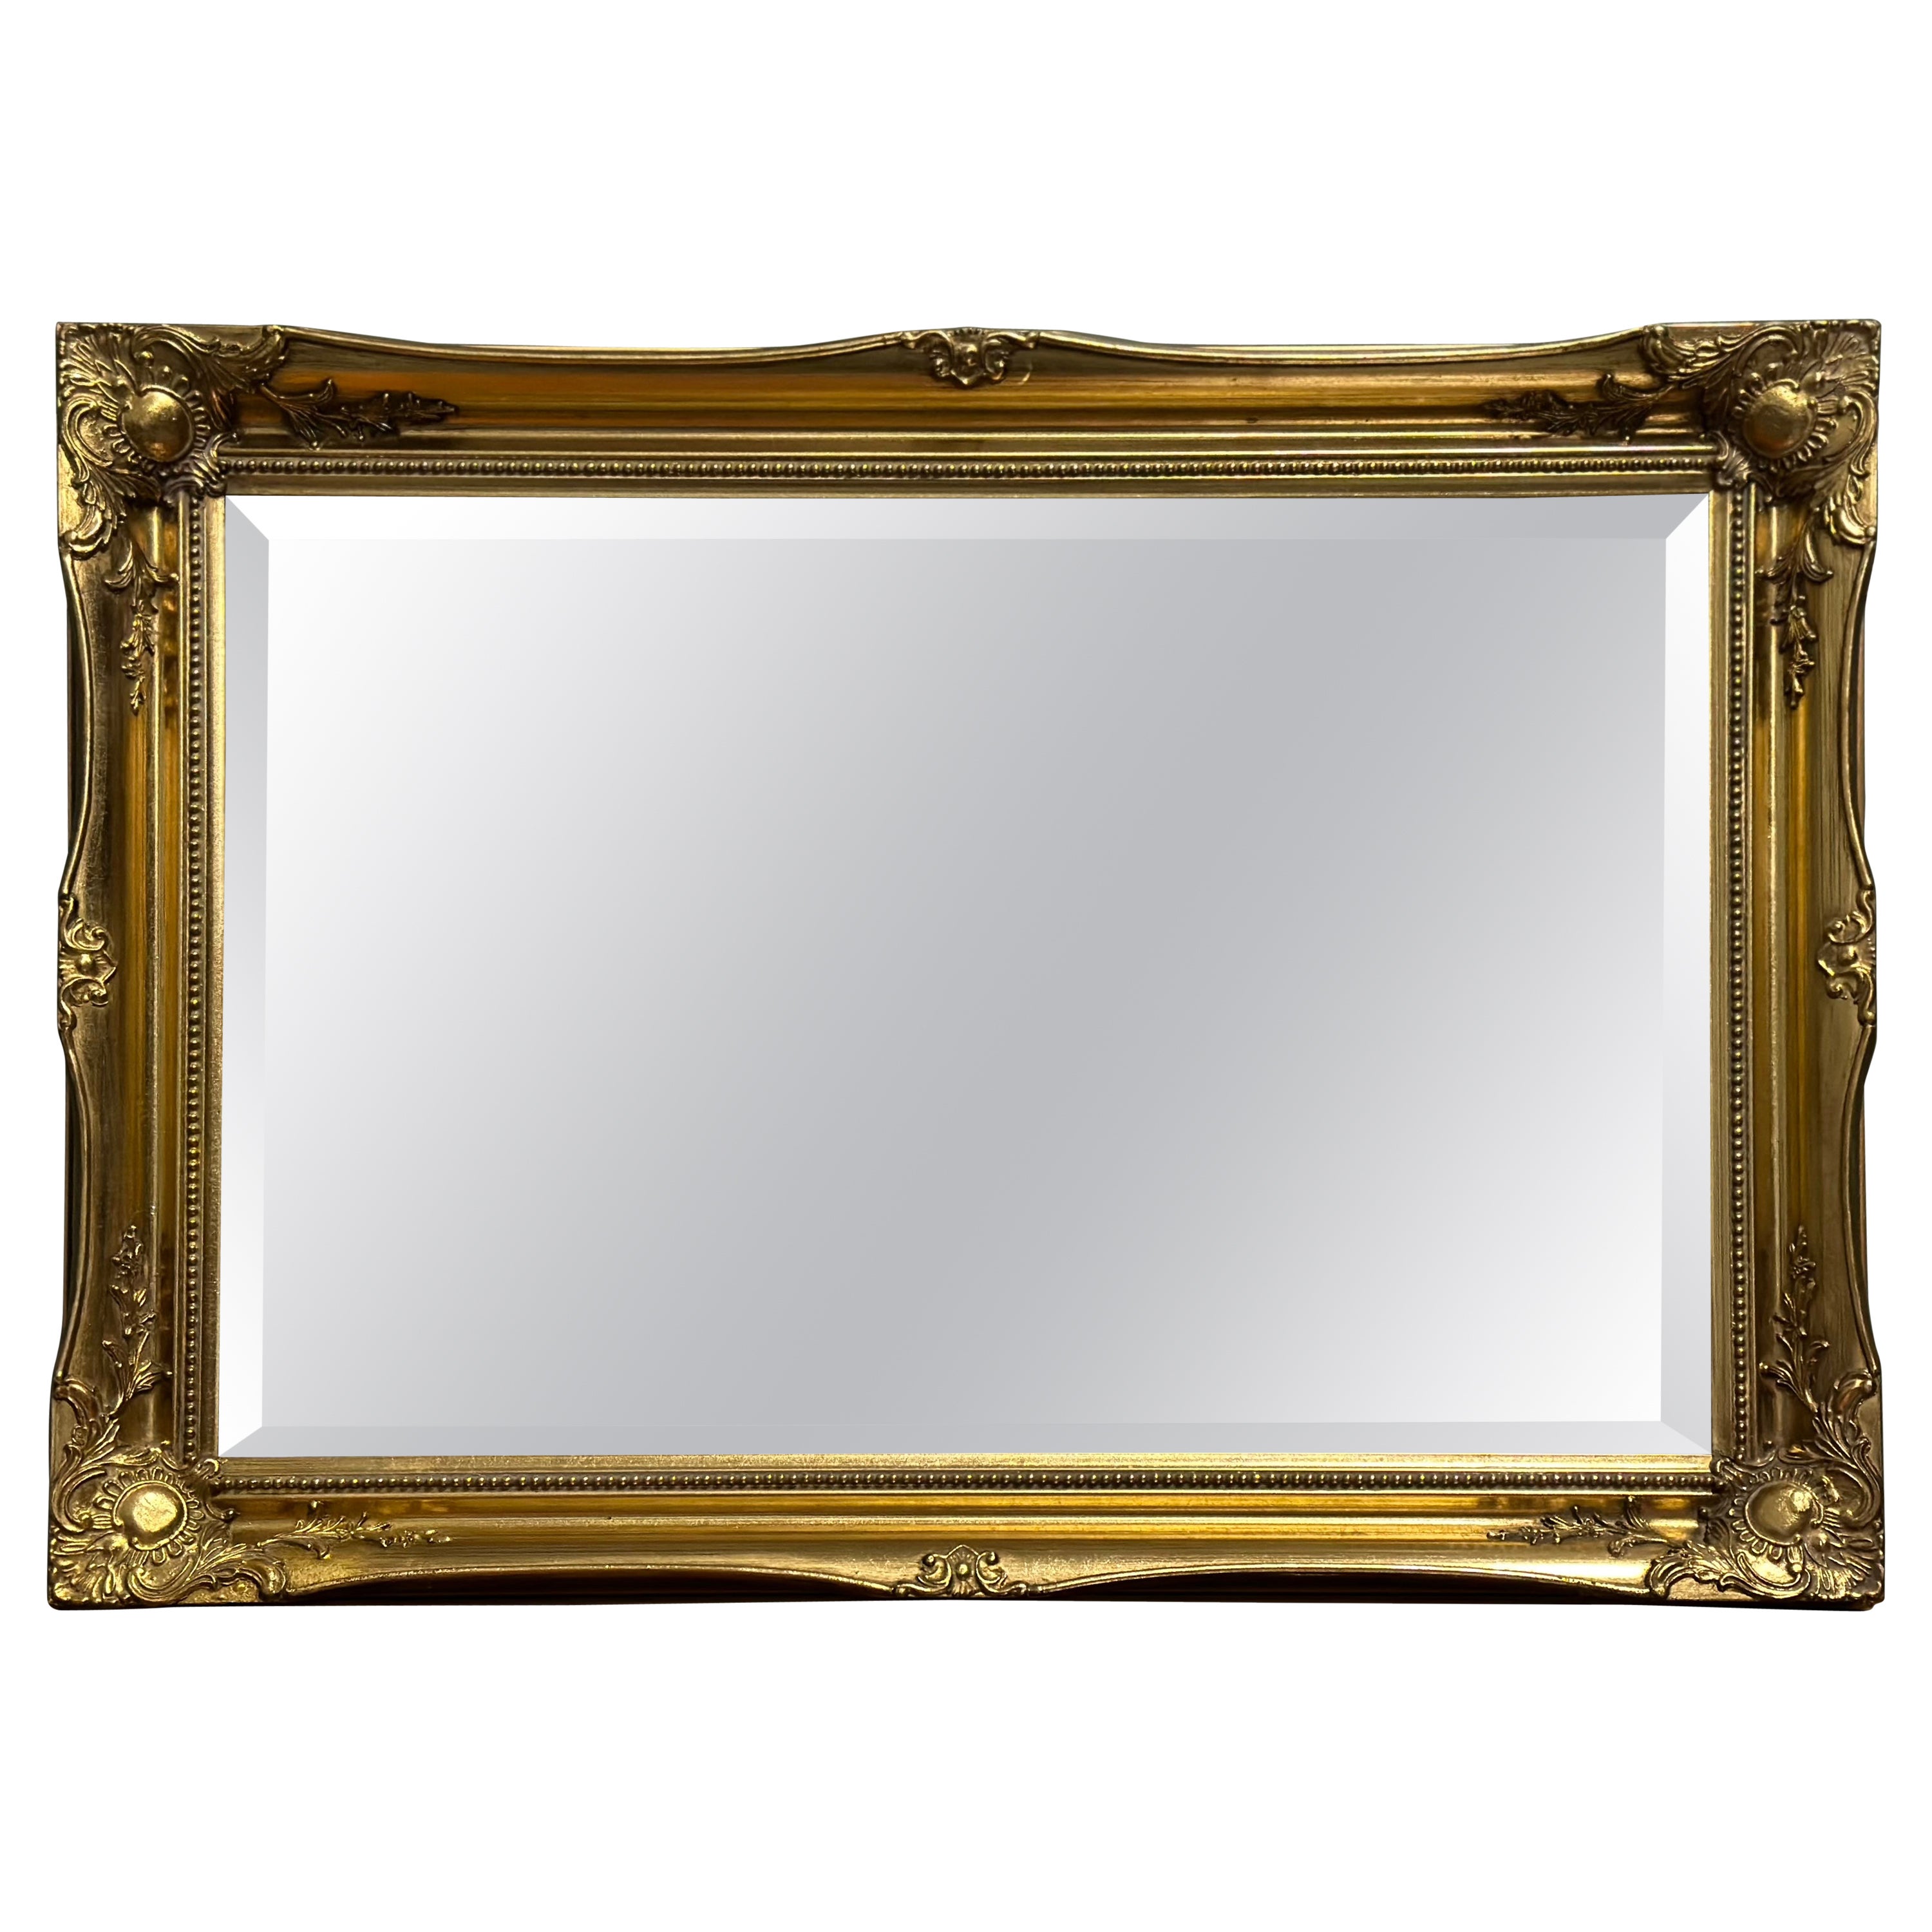 Vintage Golden Gilt Style Overmantel Wall Hanging Mirror For Sale